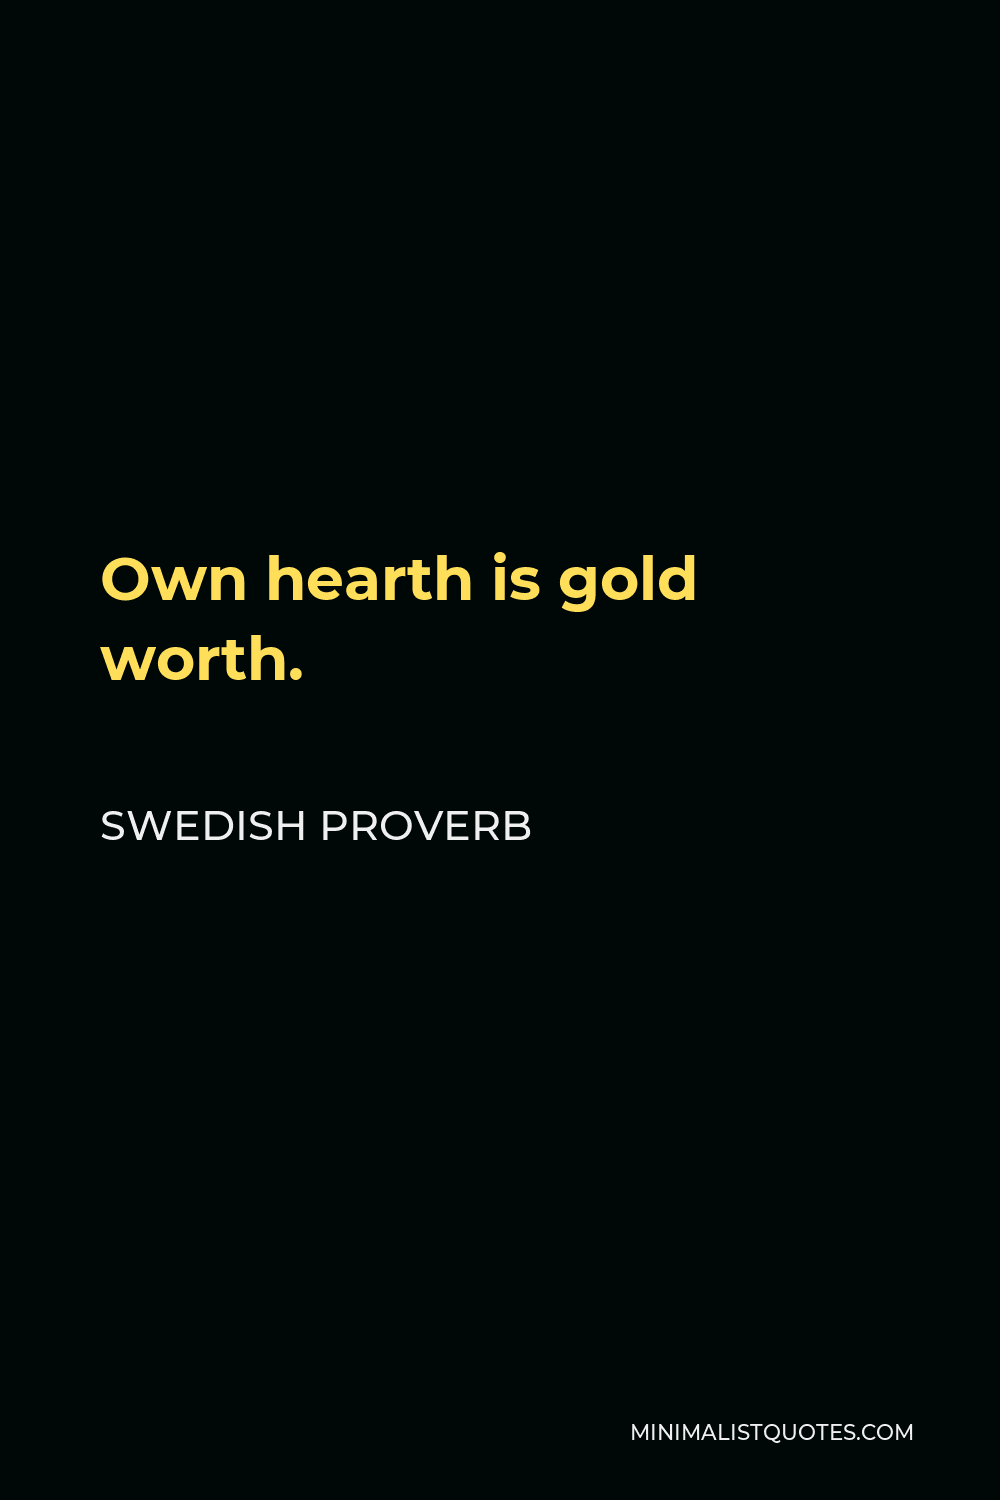 Swedish Proverb Quote - Own hearth is gold worth.